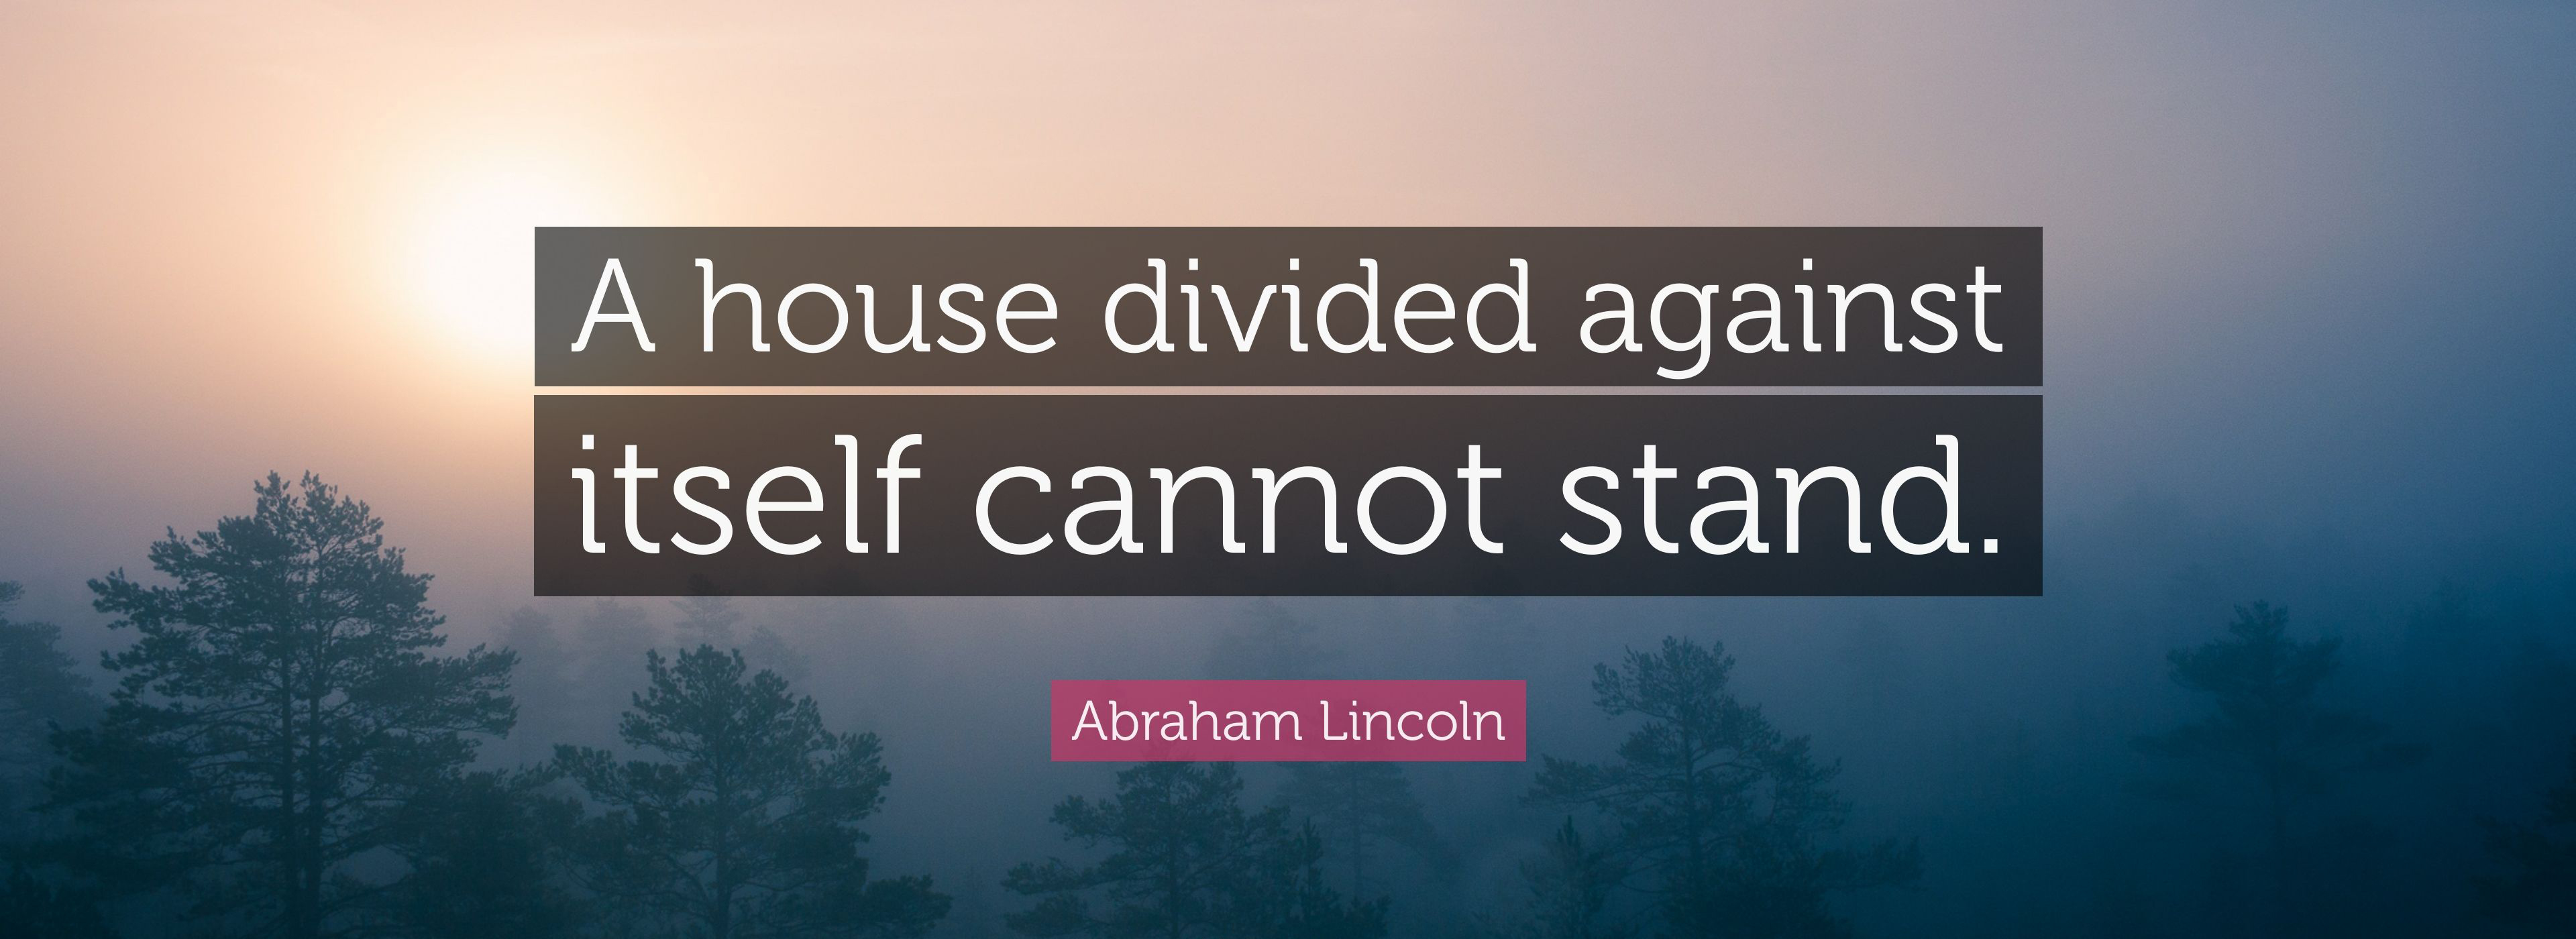 A House Divided - Lincoln